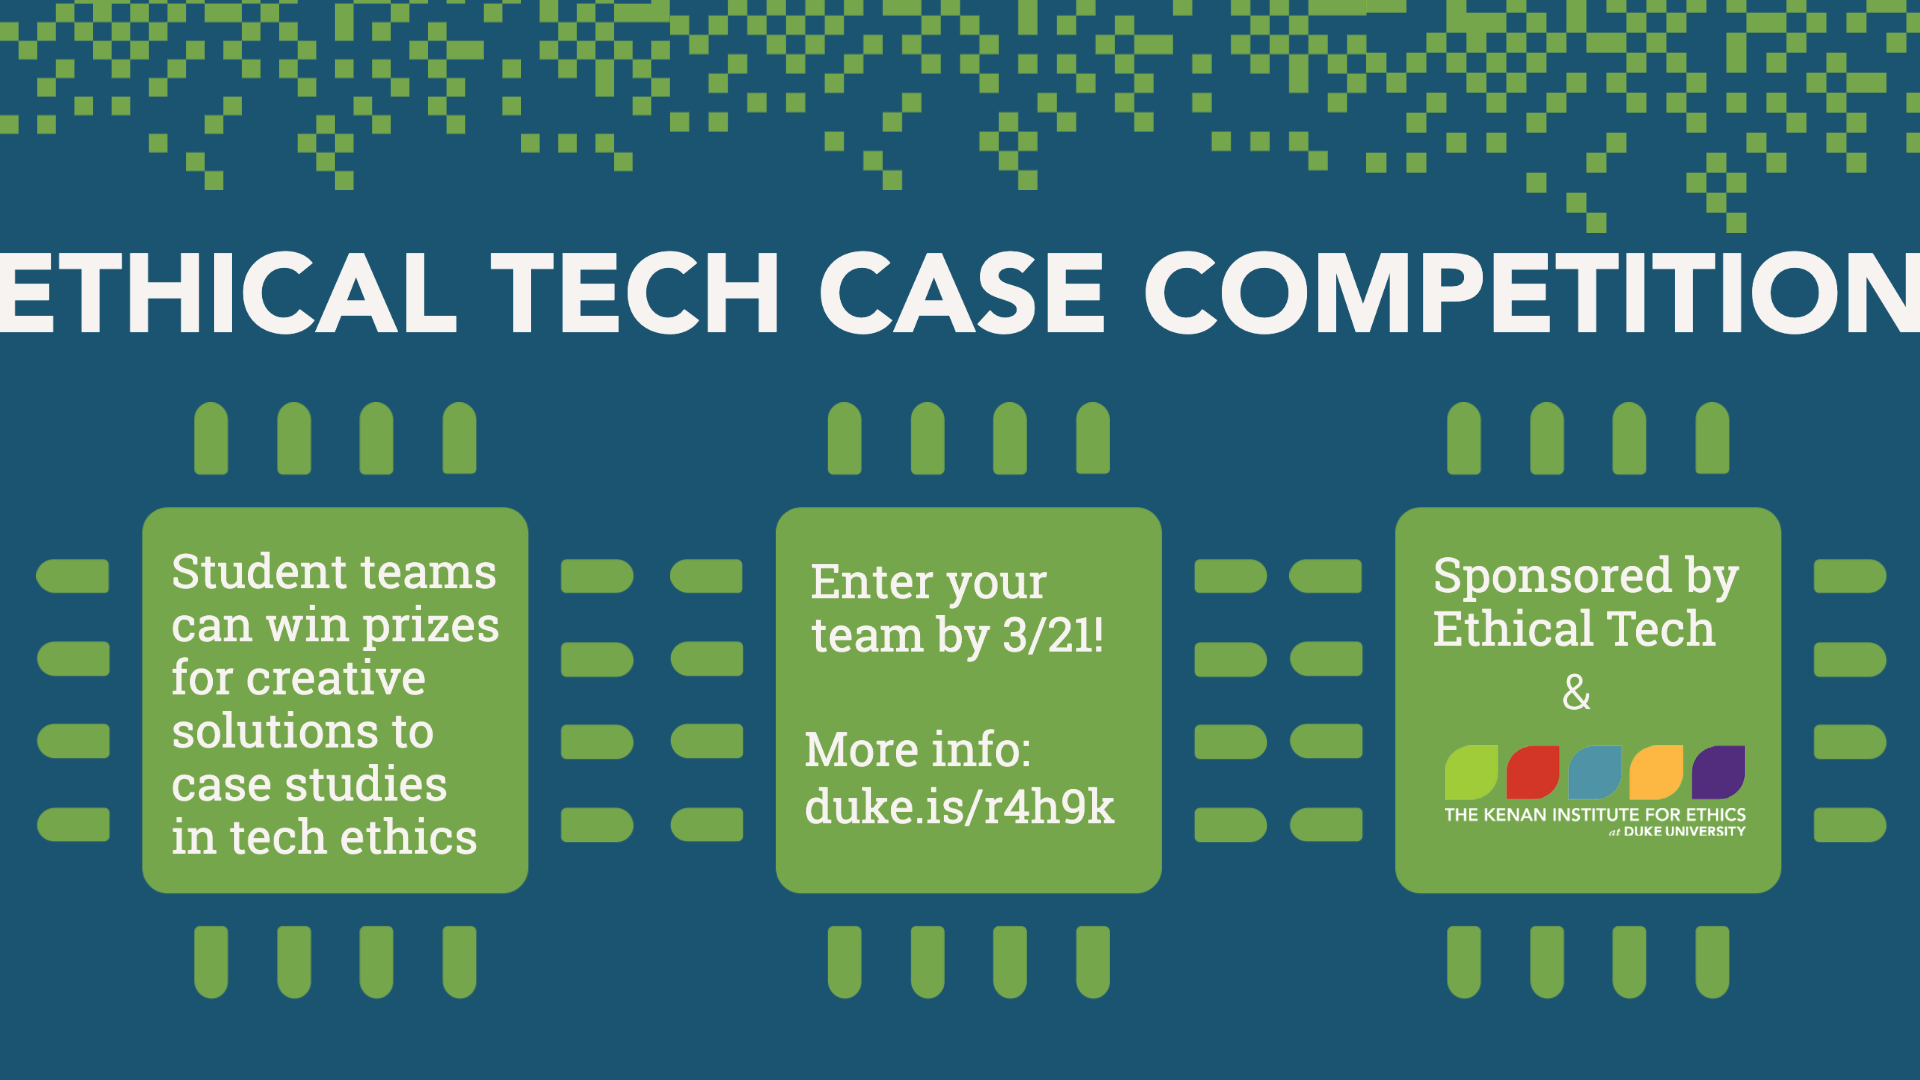 ETHICAL TECH CASE COMPETITION Student teams can win prizes for creative solutions to case studies in tech ethics Enter your team by 3/21! More info: duke.is/r4h9k Sponsored by Ethical Tech & the Kenan Institute for Ethics at Duke University